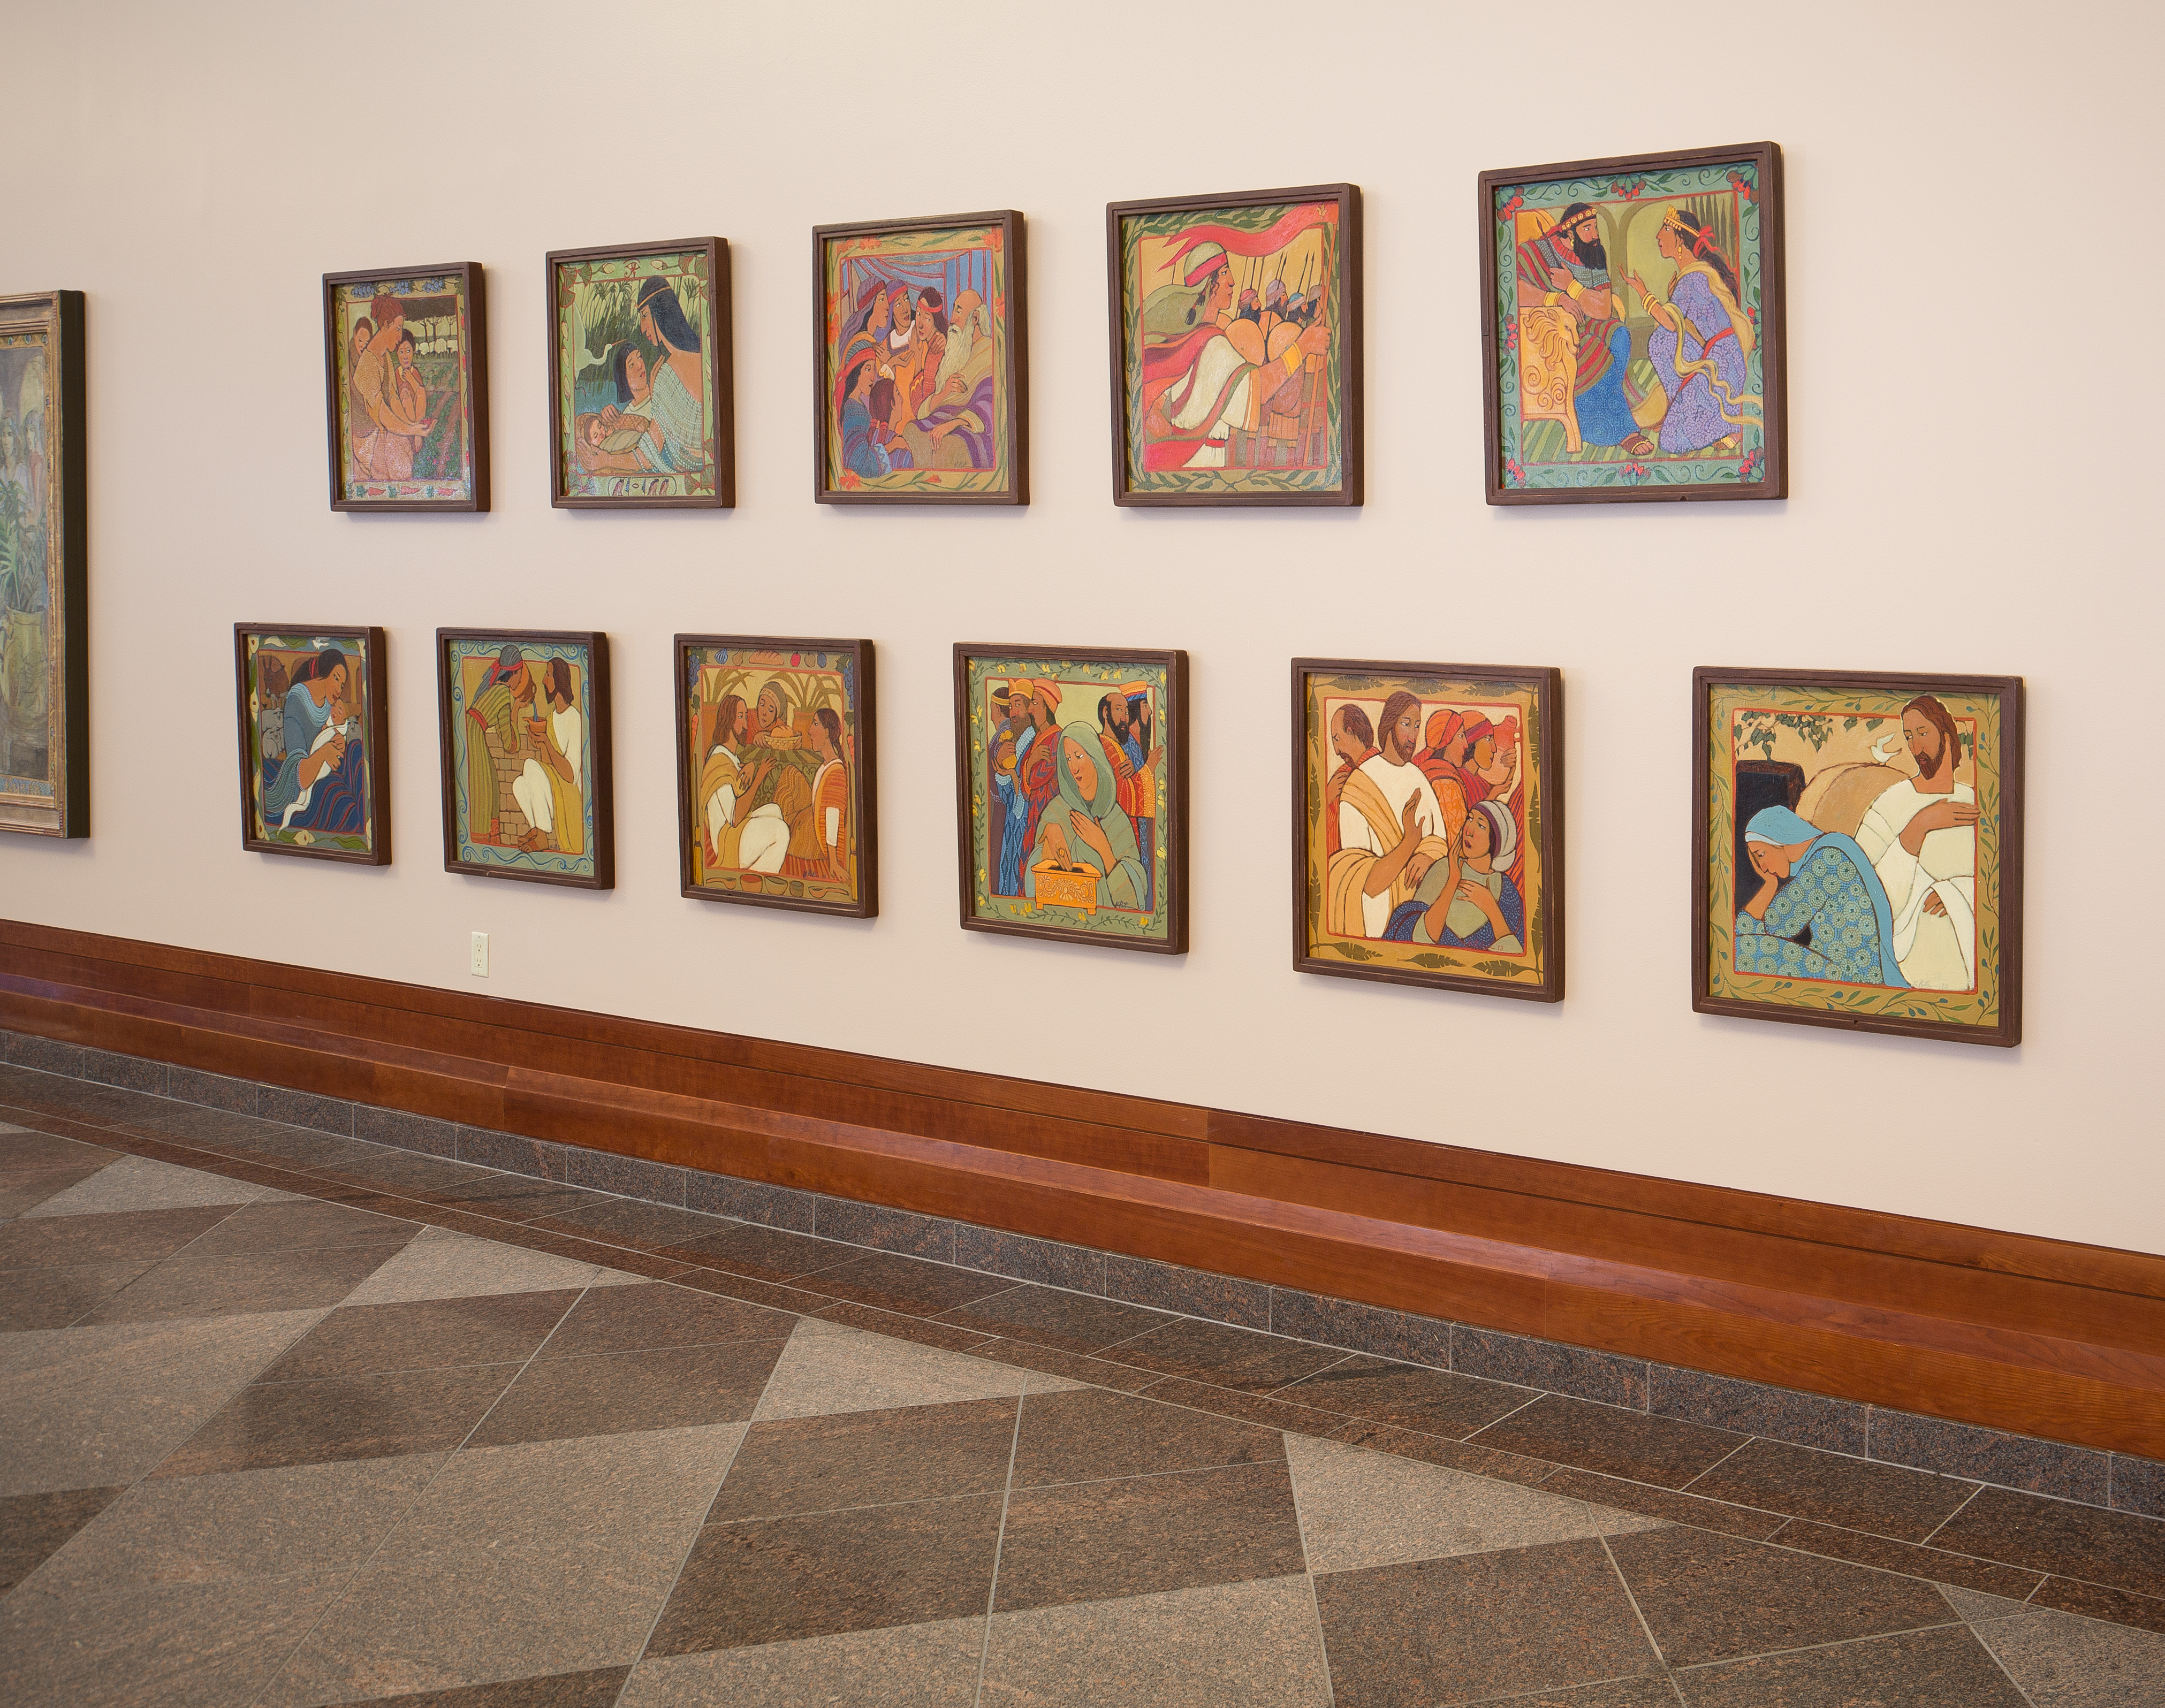 Conference Art Exhibit Celebrates Women of the Bible - Church News ...